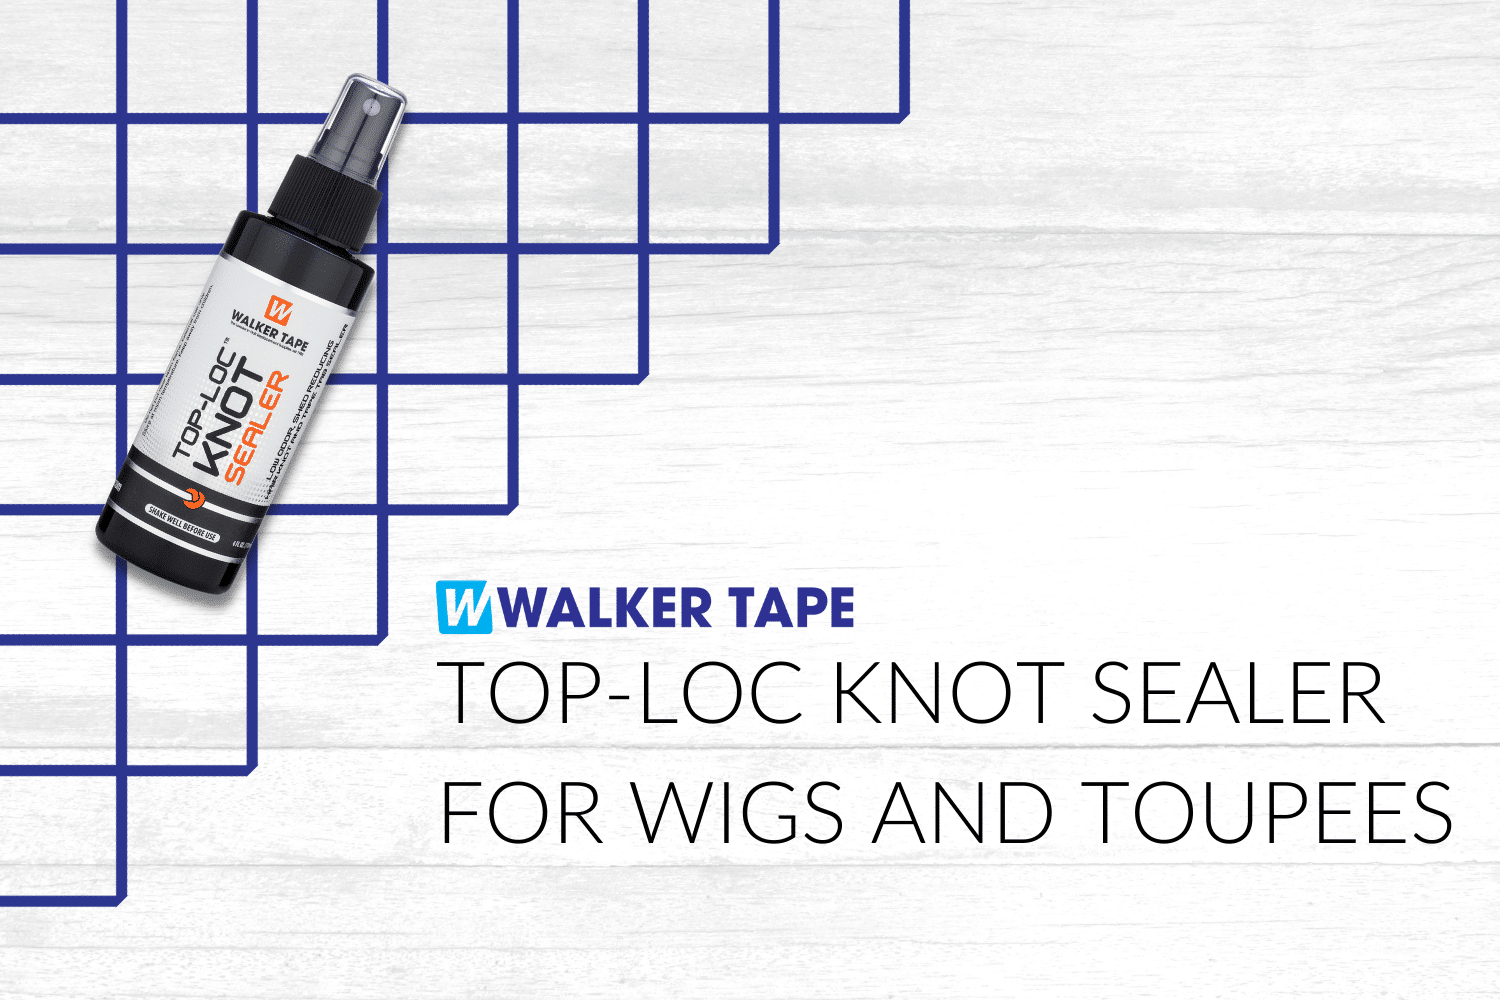 Top-Loc Knot Sealer for Wigs and Toupees Graphic